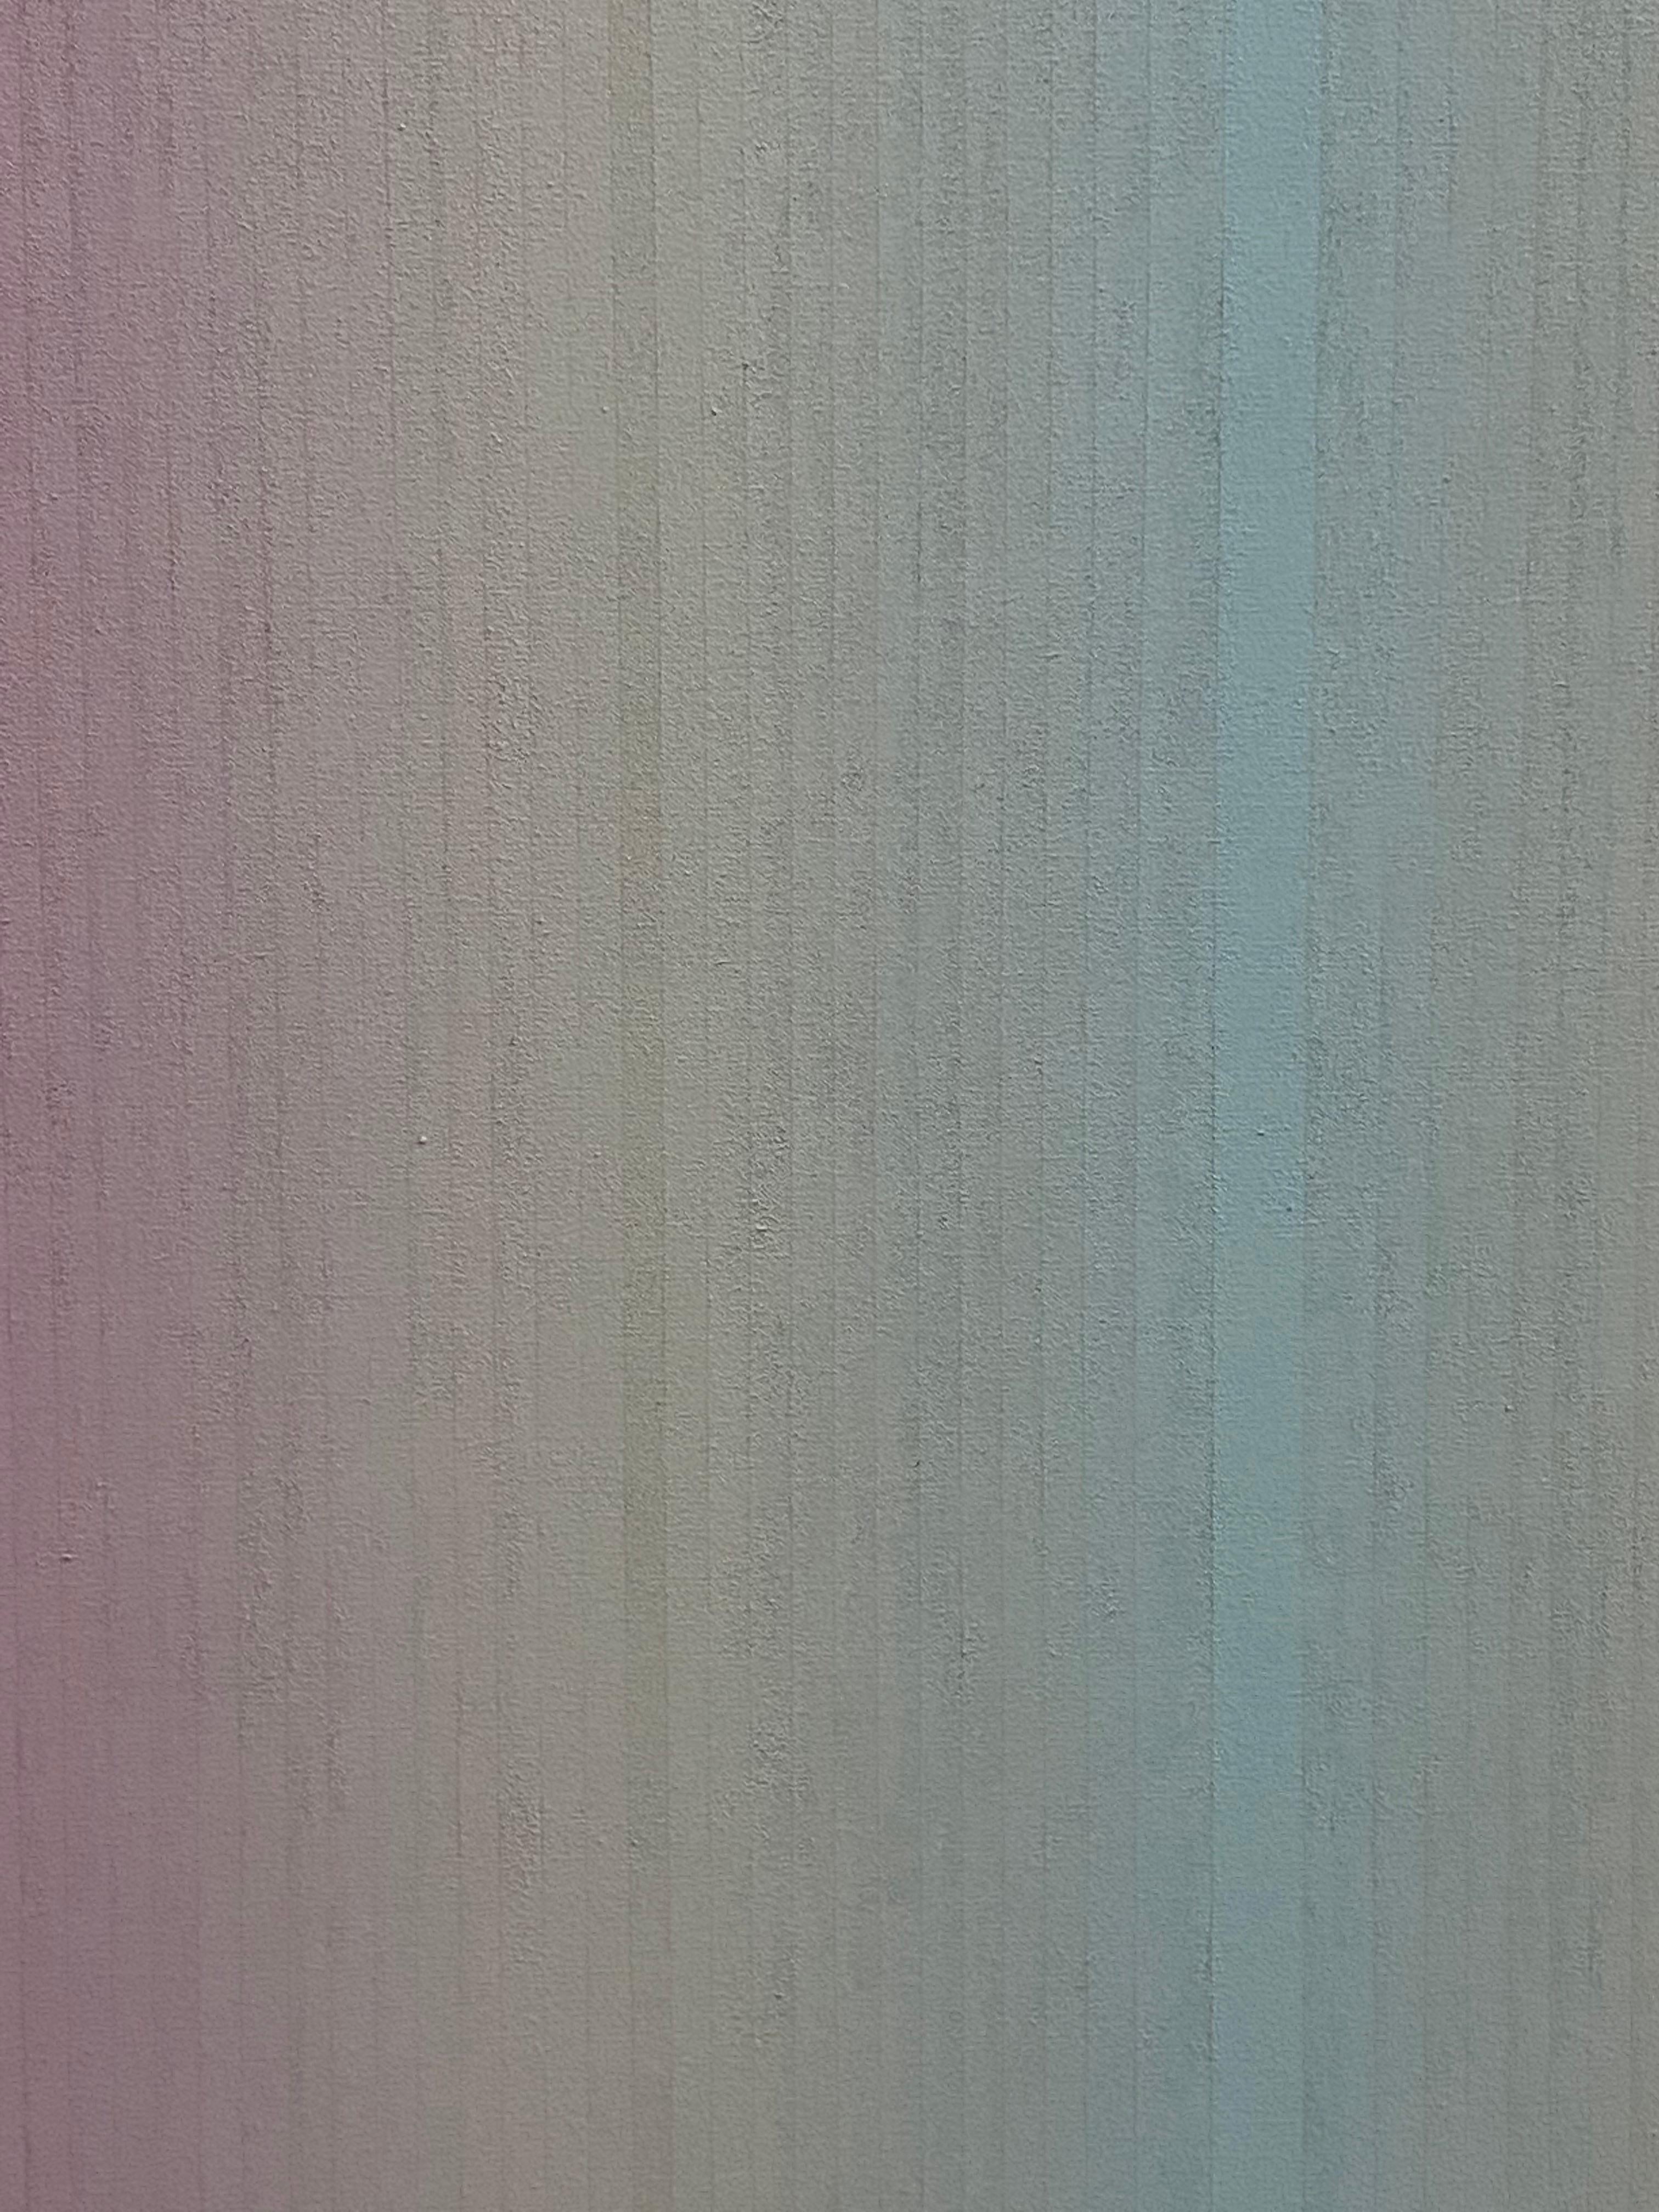 Keeping Close, Square Abstract Painting with Stripes, Pale Lilac, Blue, Gray For Sale 3